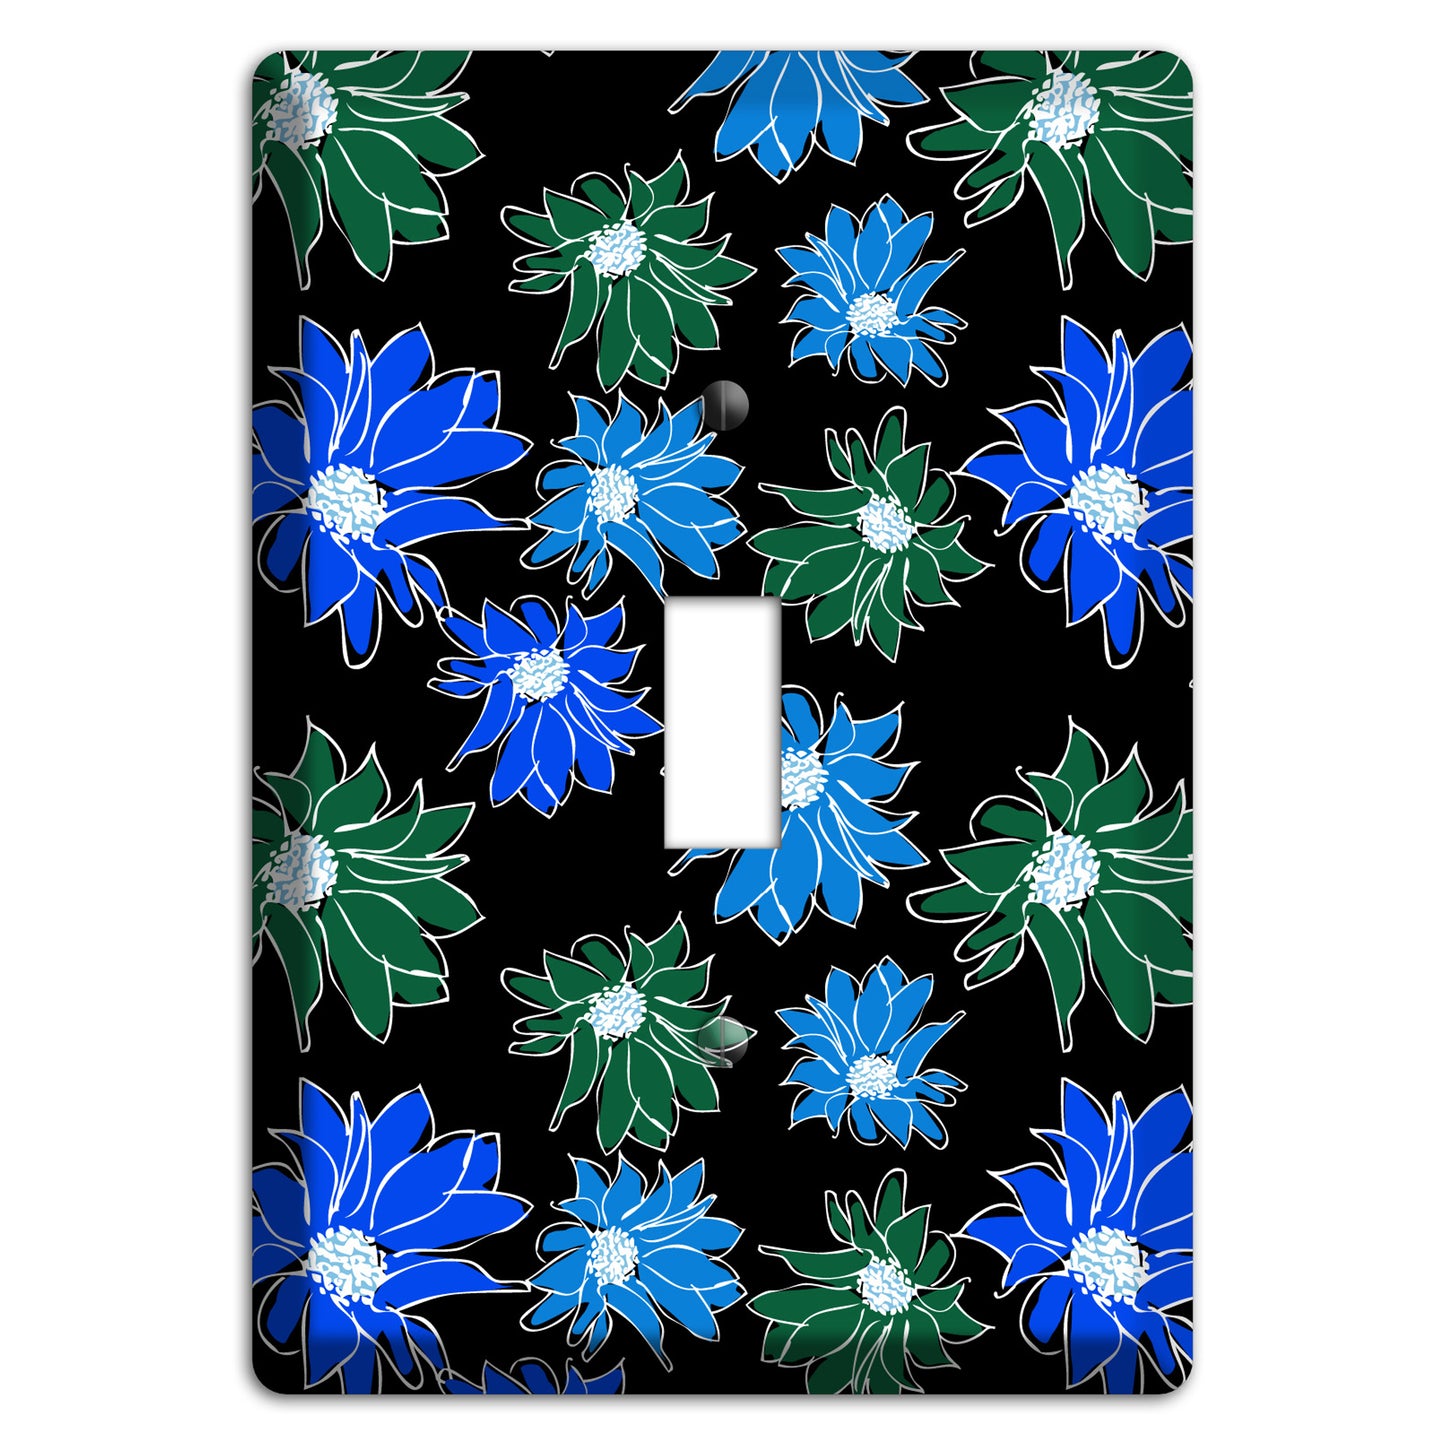 Blue and Green Flowers Cover Plates